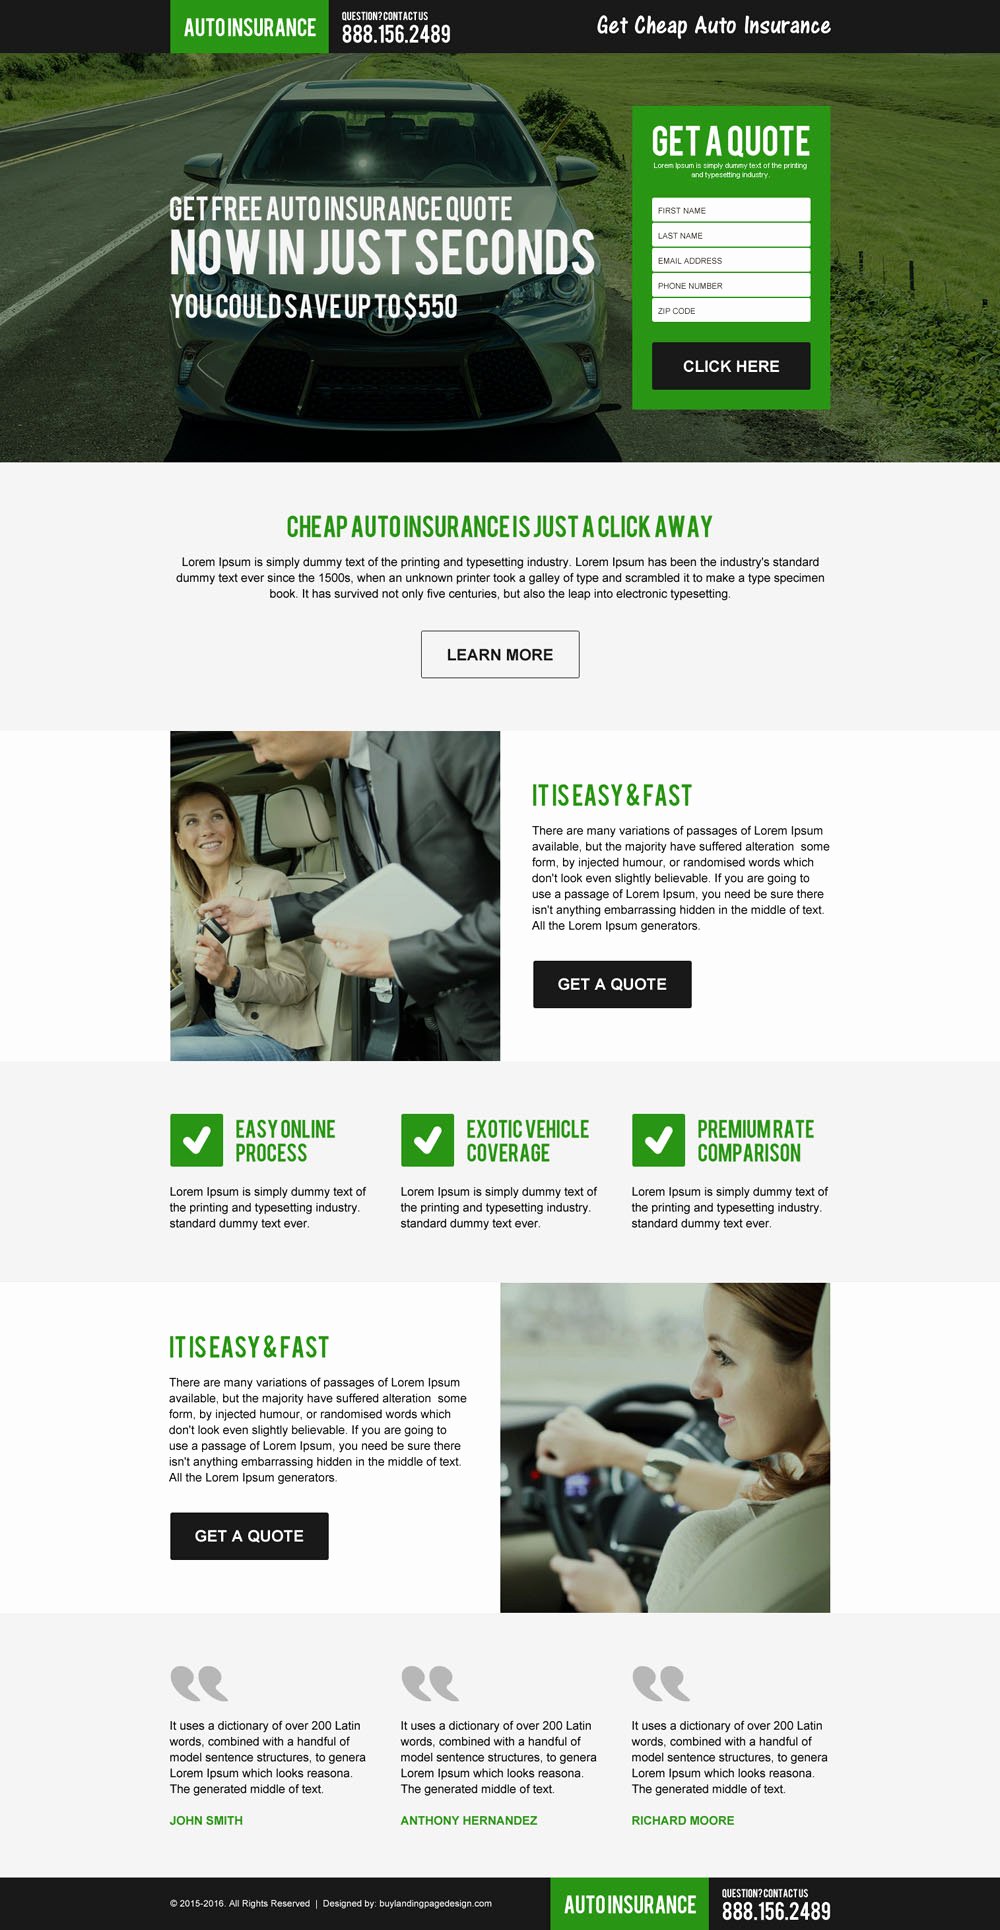 Auto Insurance Card Generator Luxury Innovative and Creative Landing Page Design Trends 2016